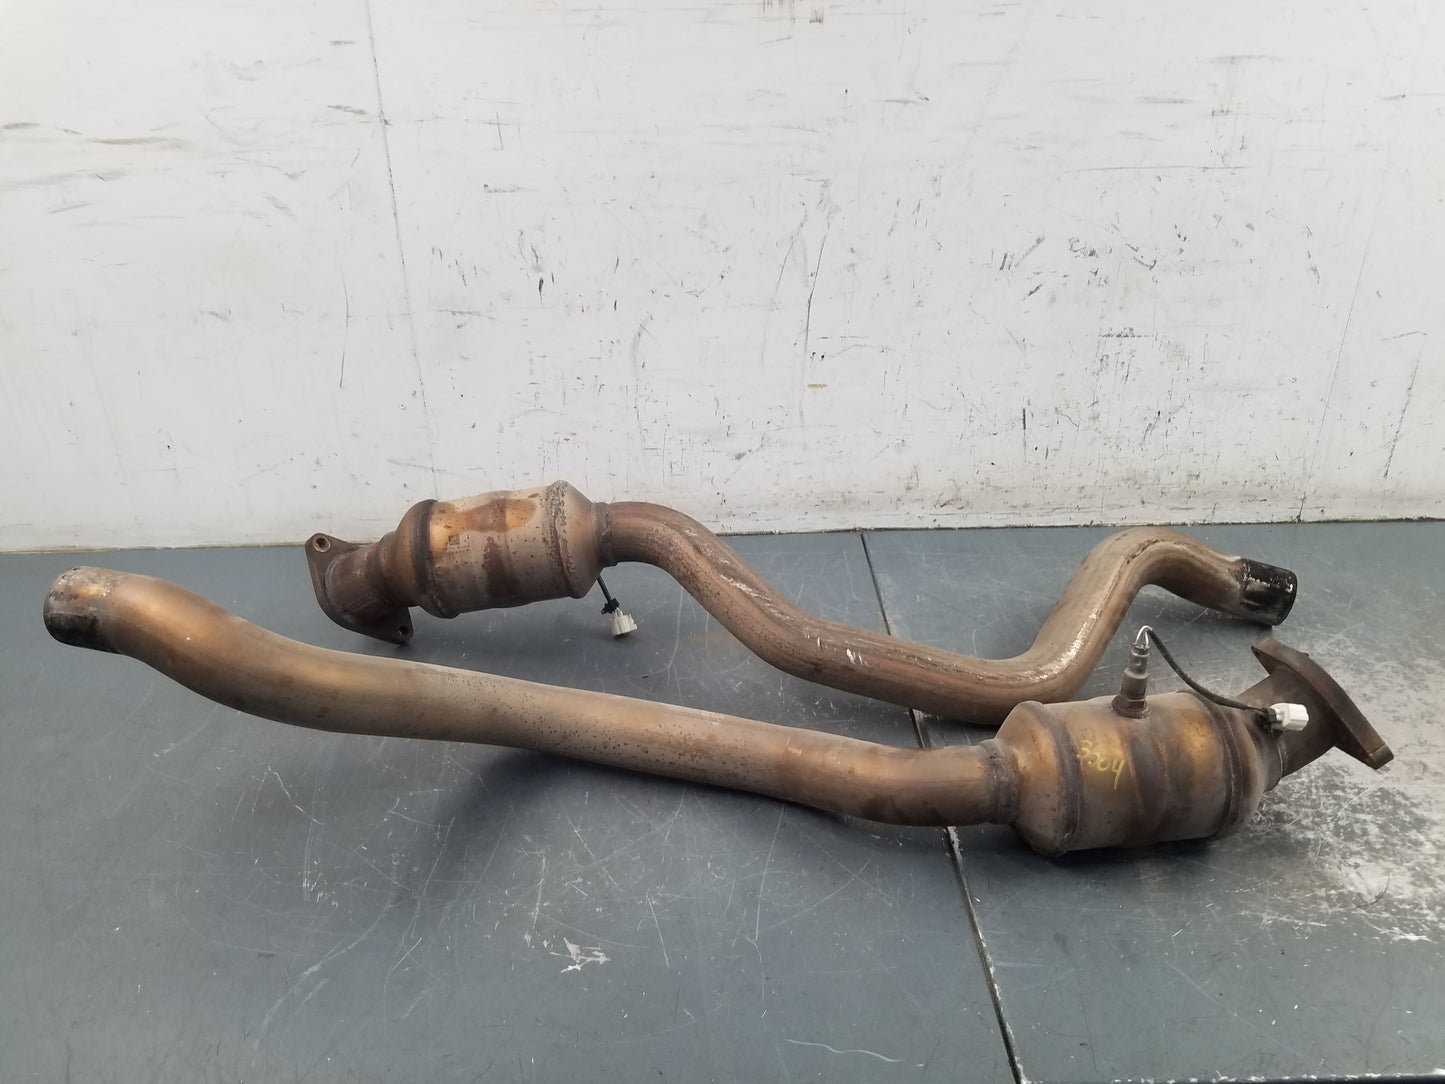 2019 Dodge Charger SRT Hellcat Downpipes / CATs #3405 S5